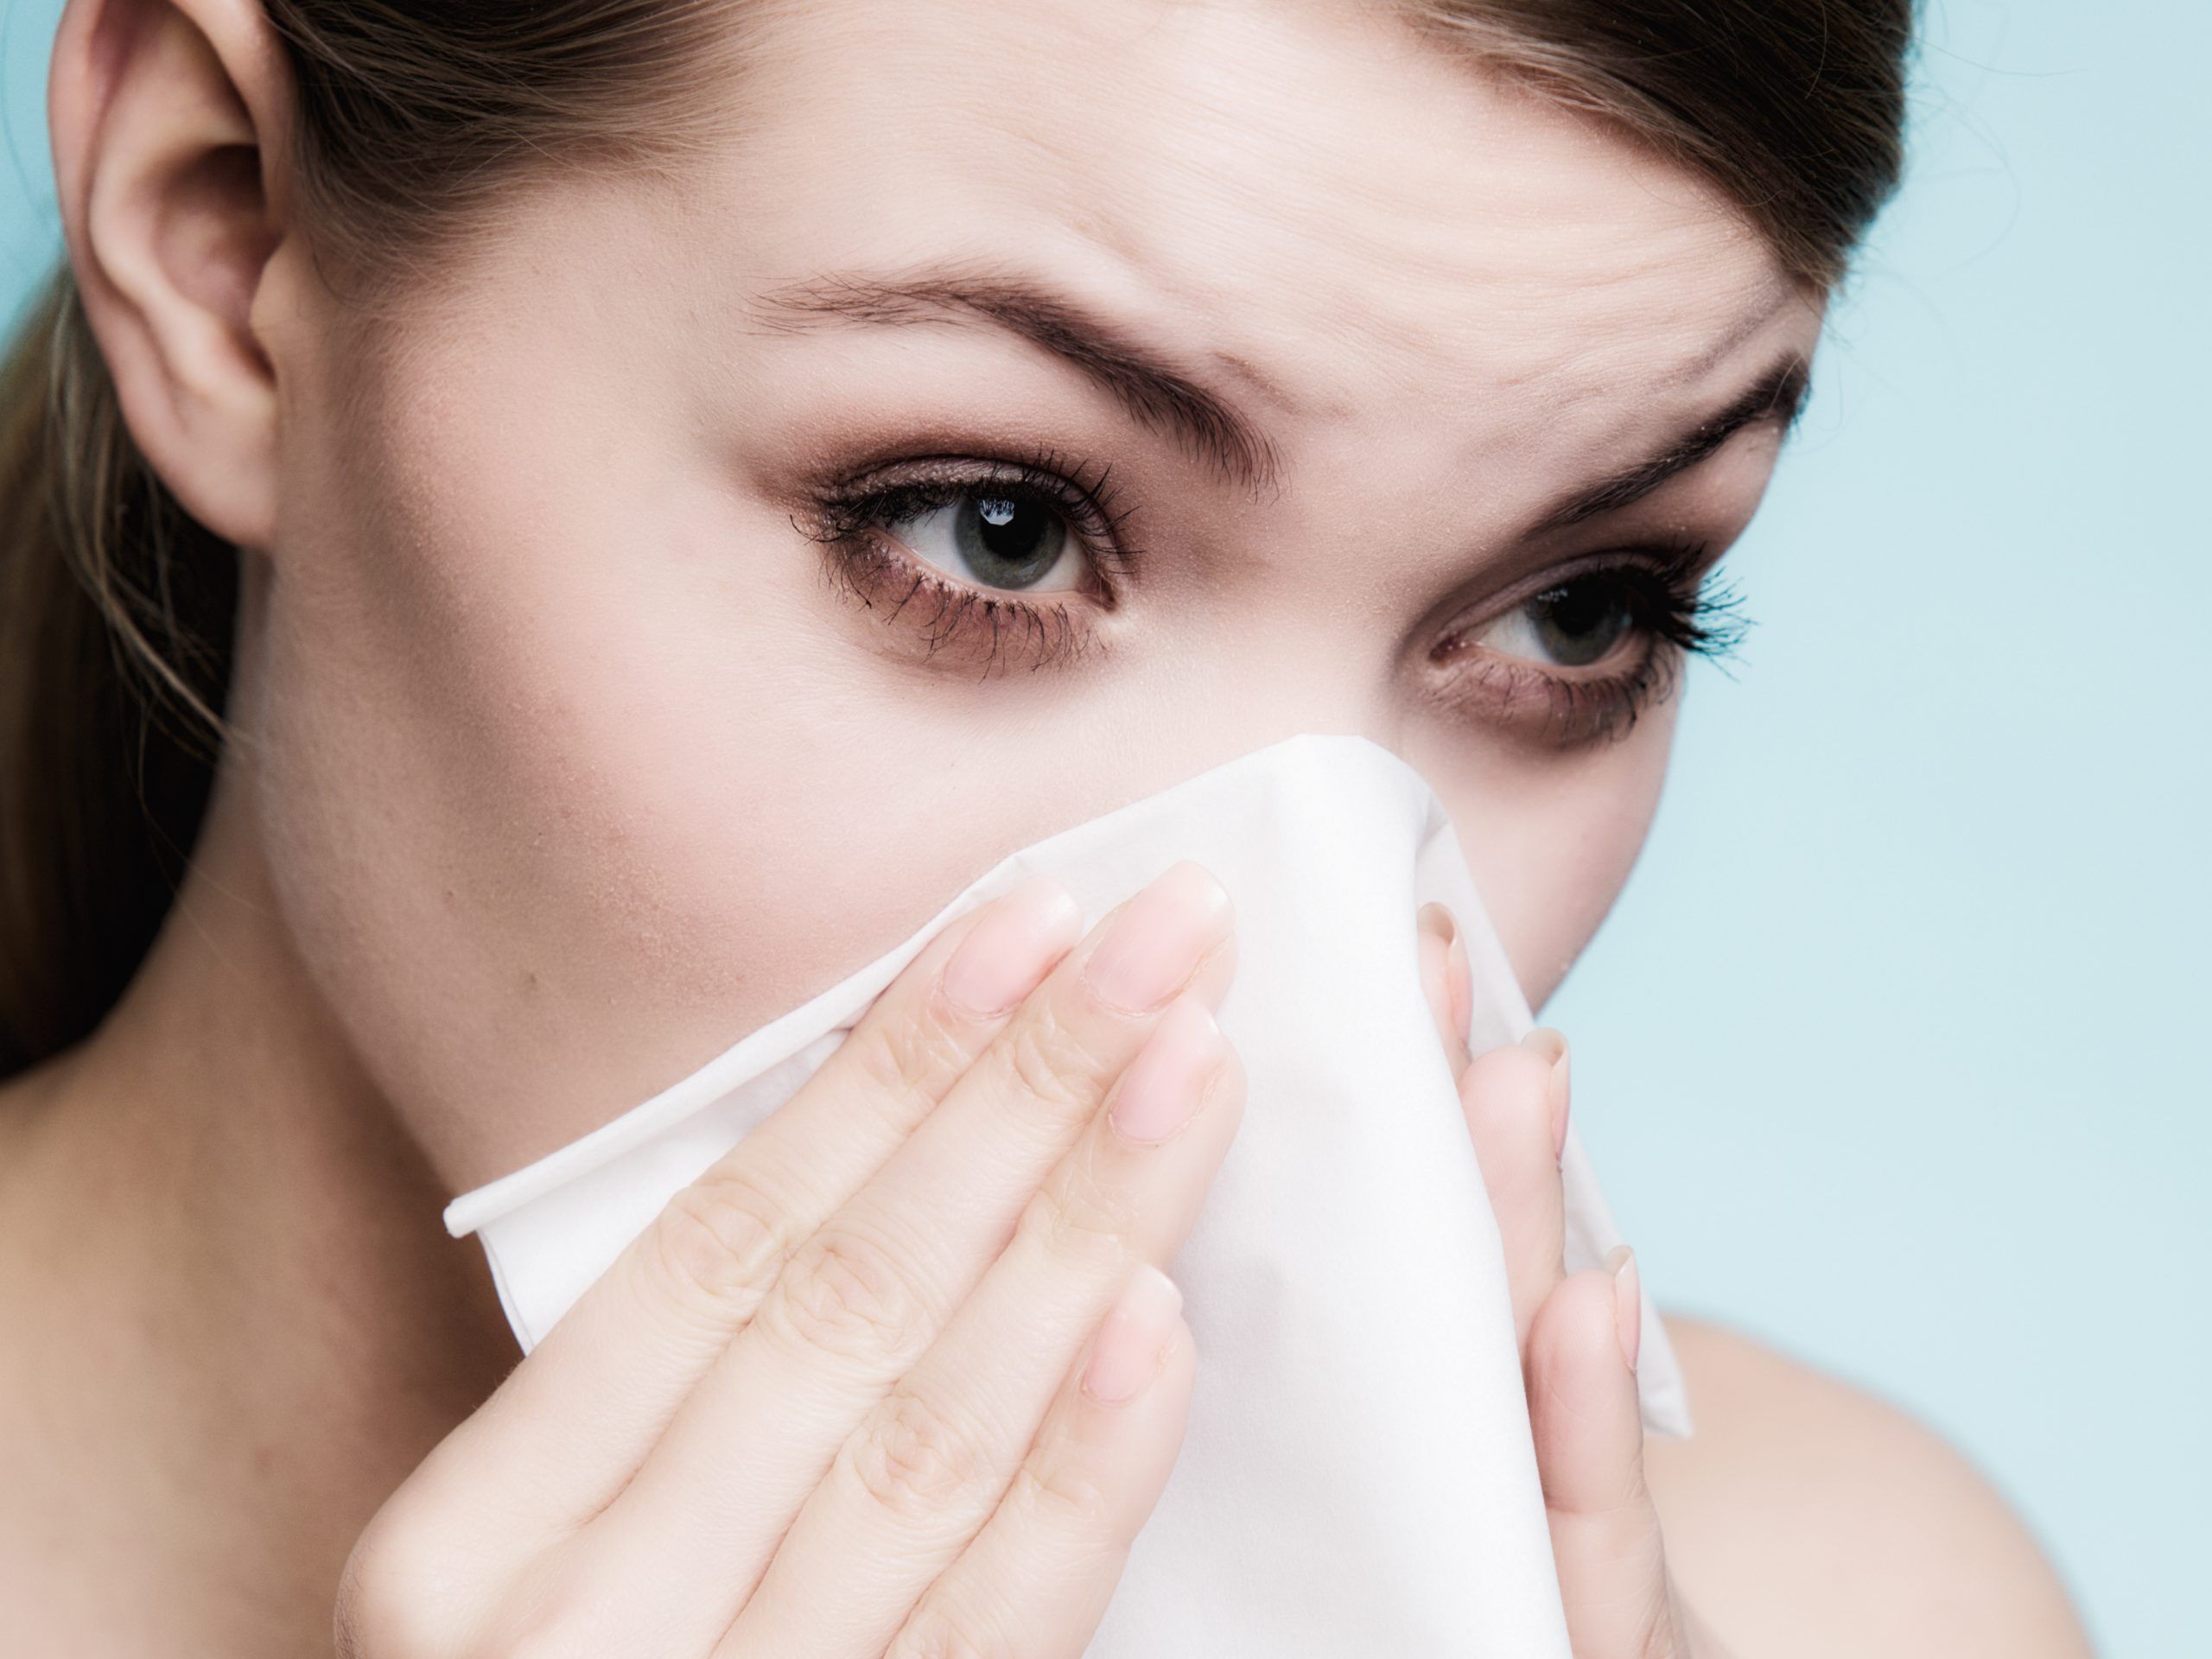 Is It a Cold or Winter Allergies?